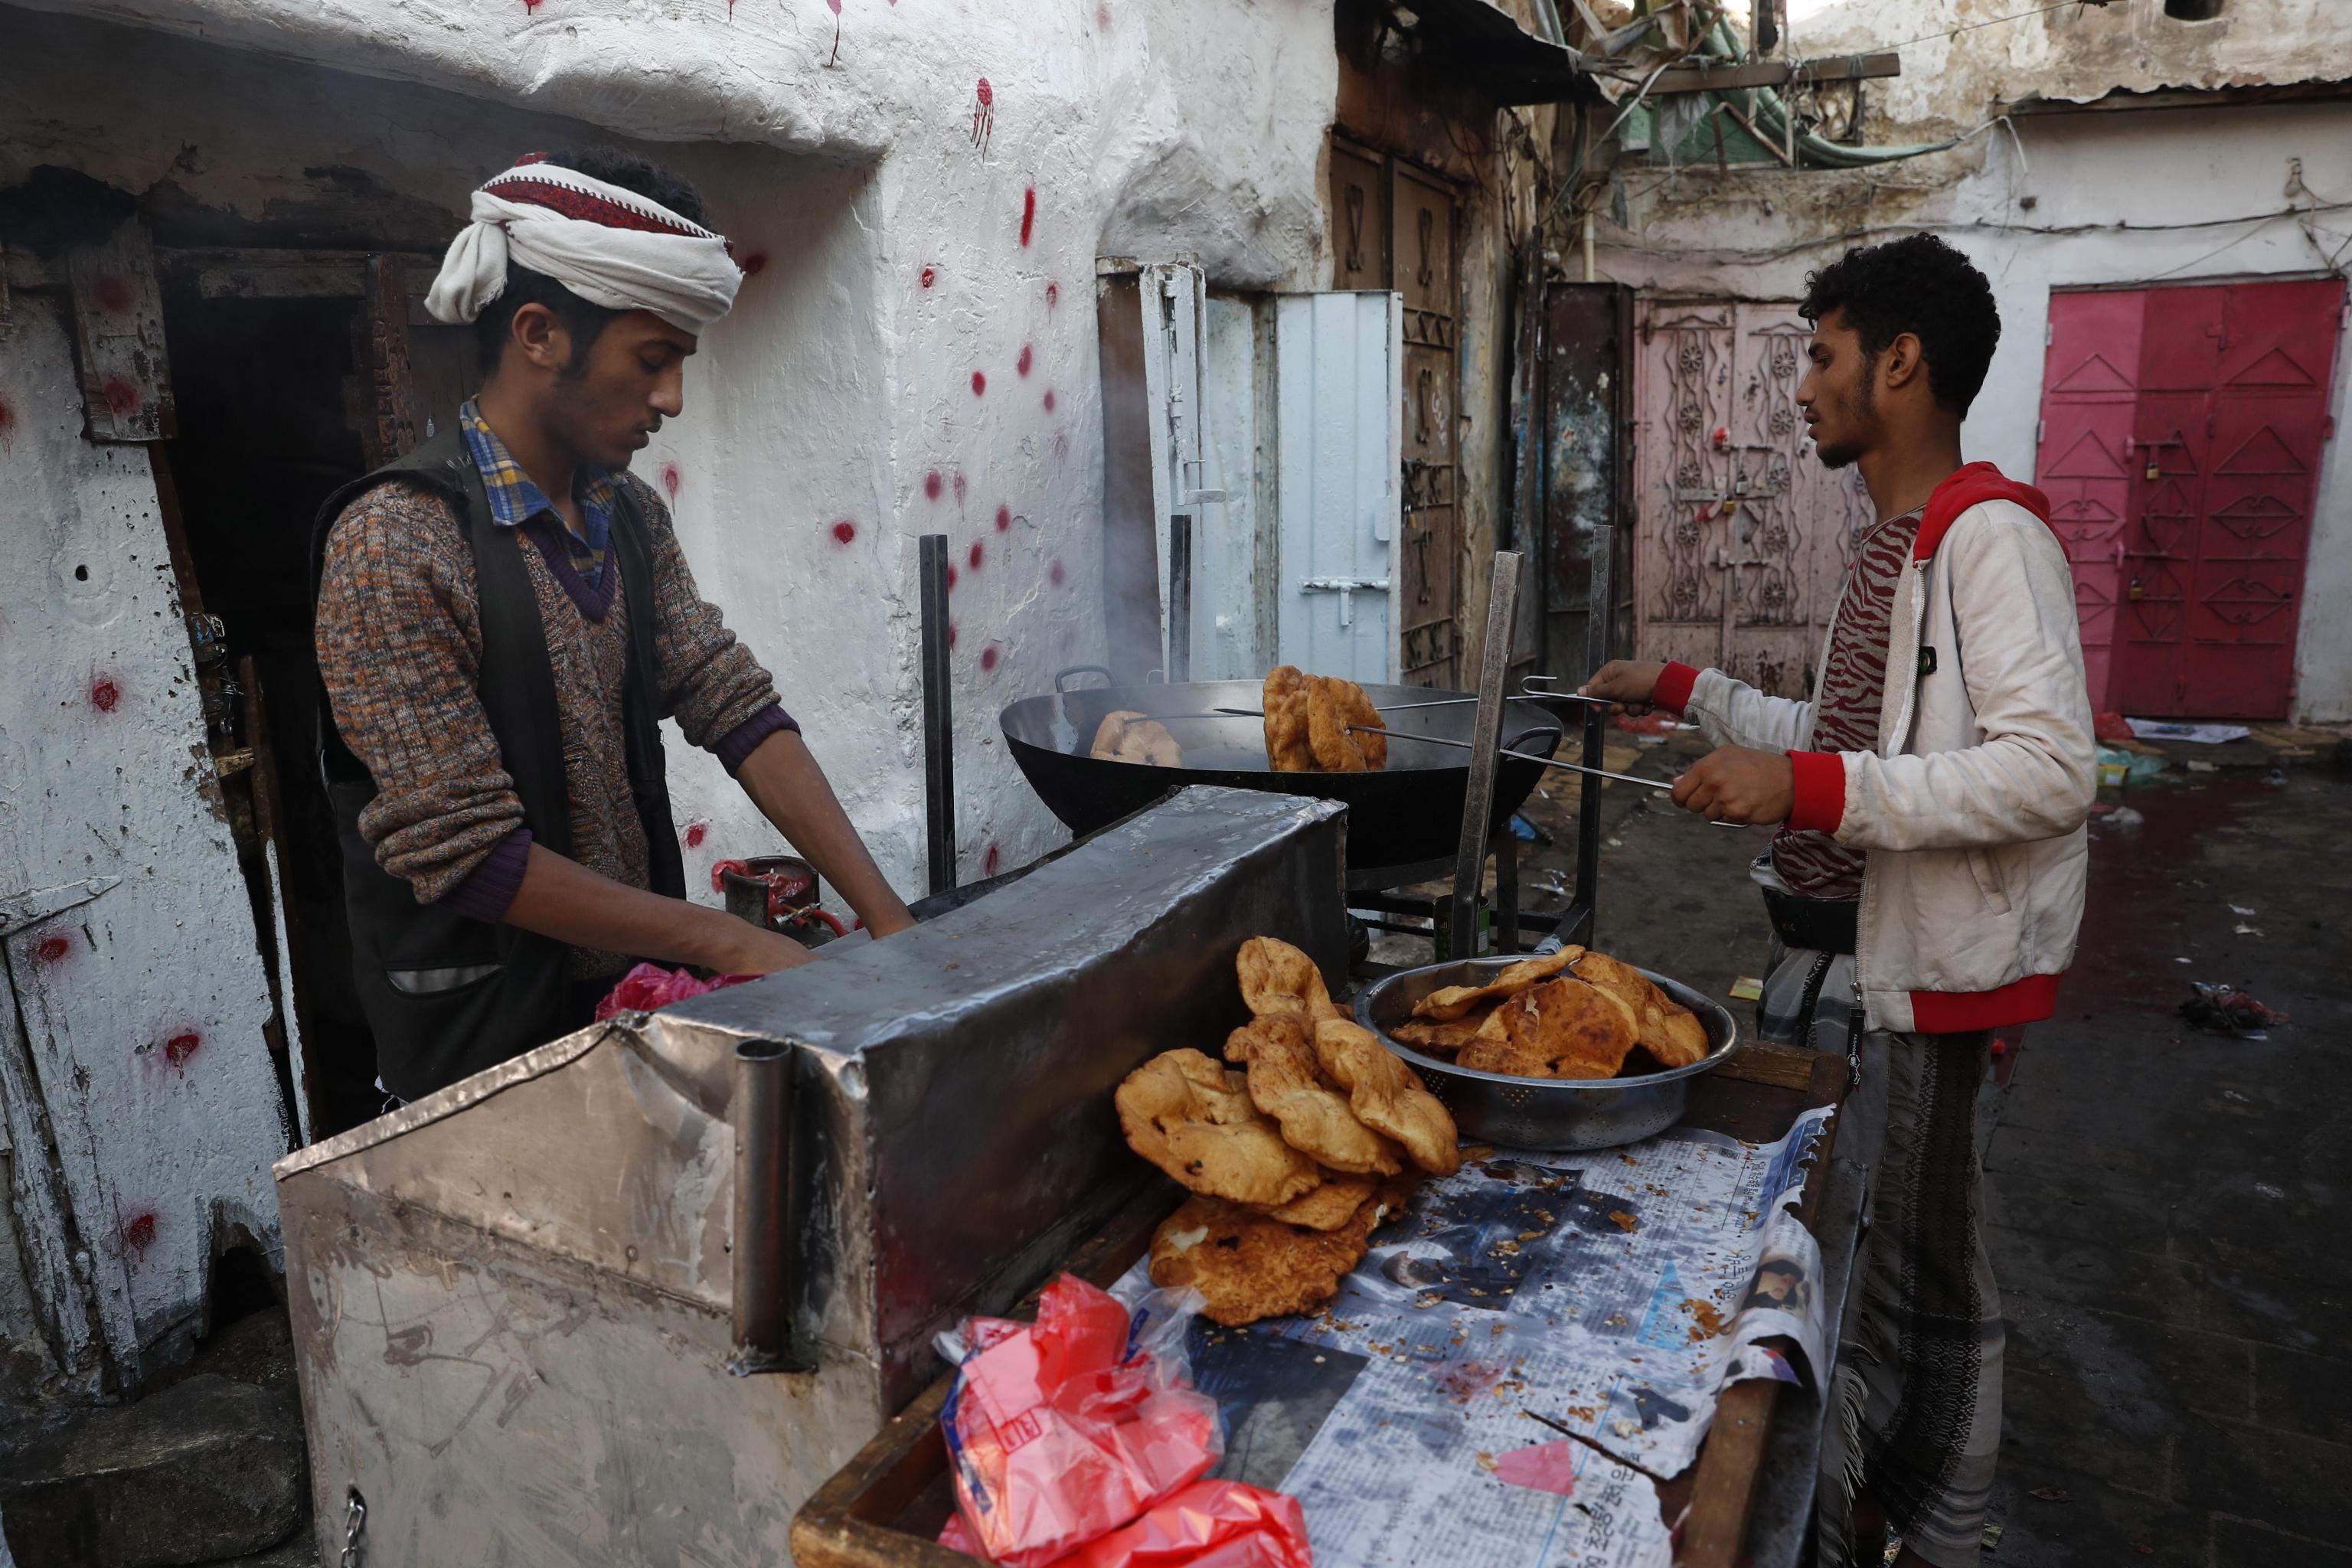 epa07929506 A man prepares bread for sale at a market in the old quarter of Sanaâa, Yemen, 18 October 2019. Yemen has been in a state of political crisis since the 2011-street protests, culminating in the outbreak of a fighting in March 2015 when the Saudi-led military coalition launched a massive air campaign against the Houthi rebel group, which overran much of the Arab country.  EPA/YAHYA ARHAB